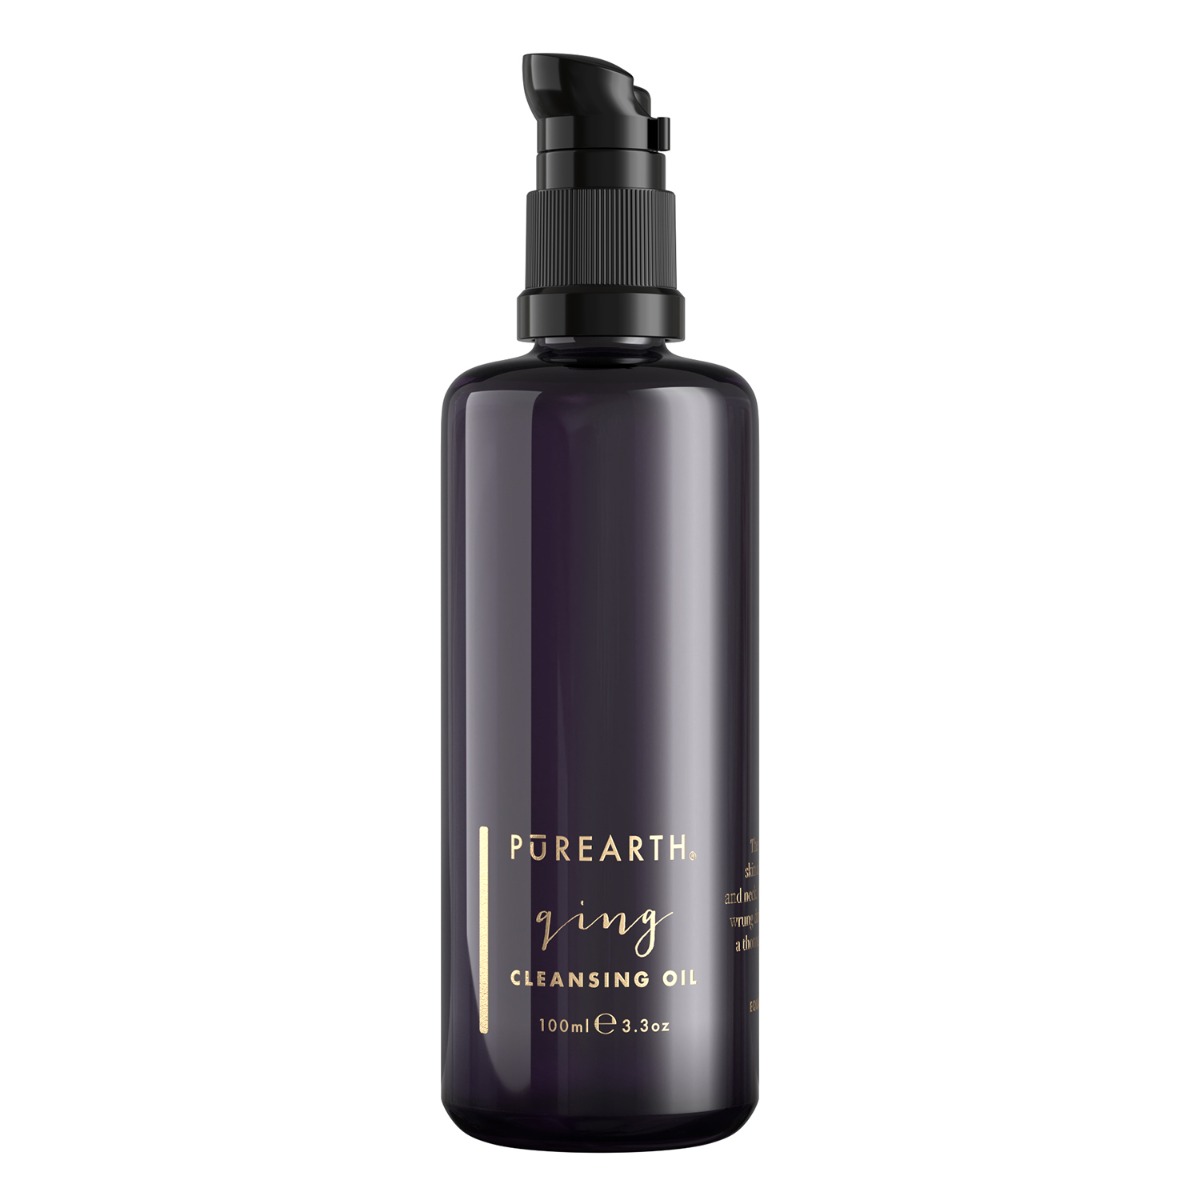 Purearth Qing Cleansing Oil, 100ml